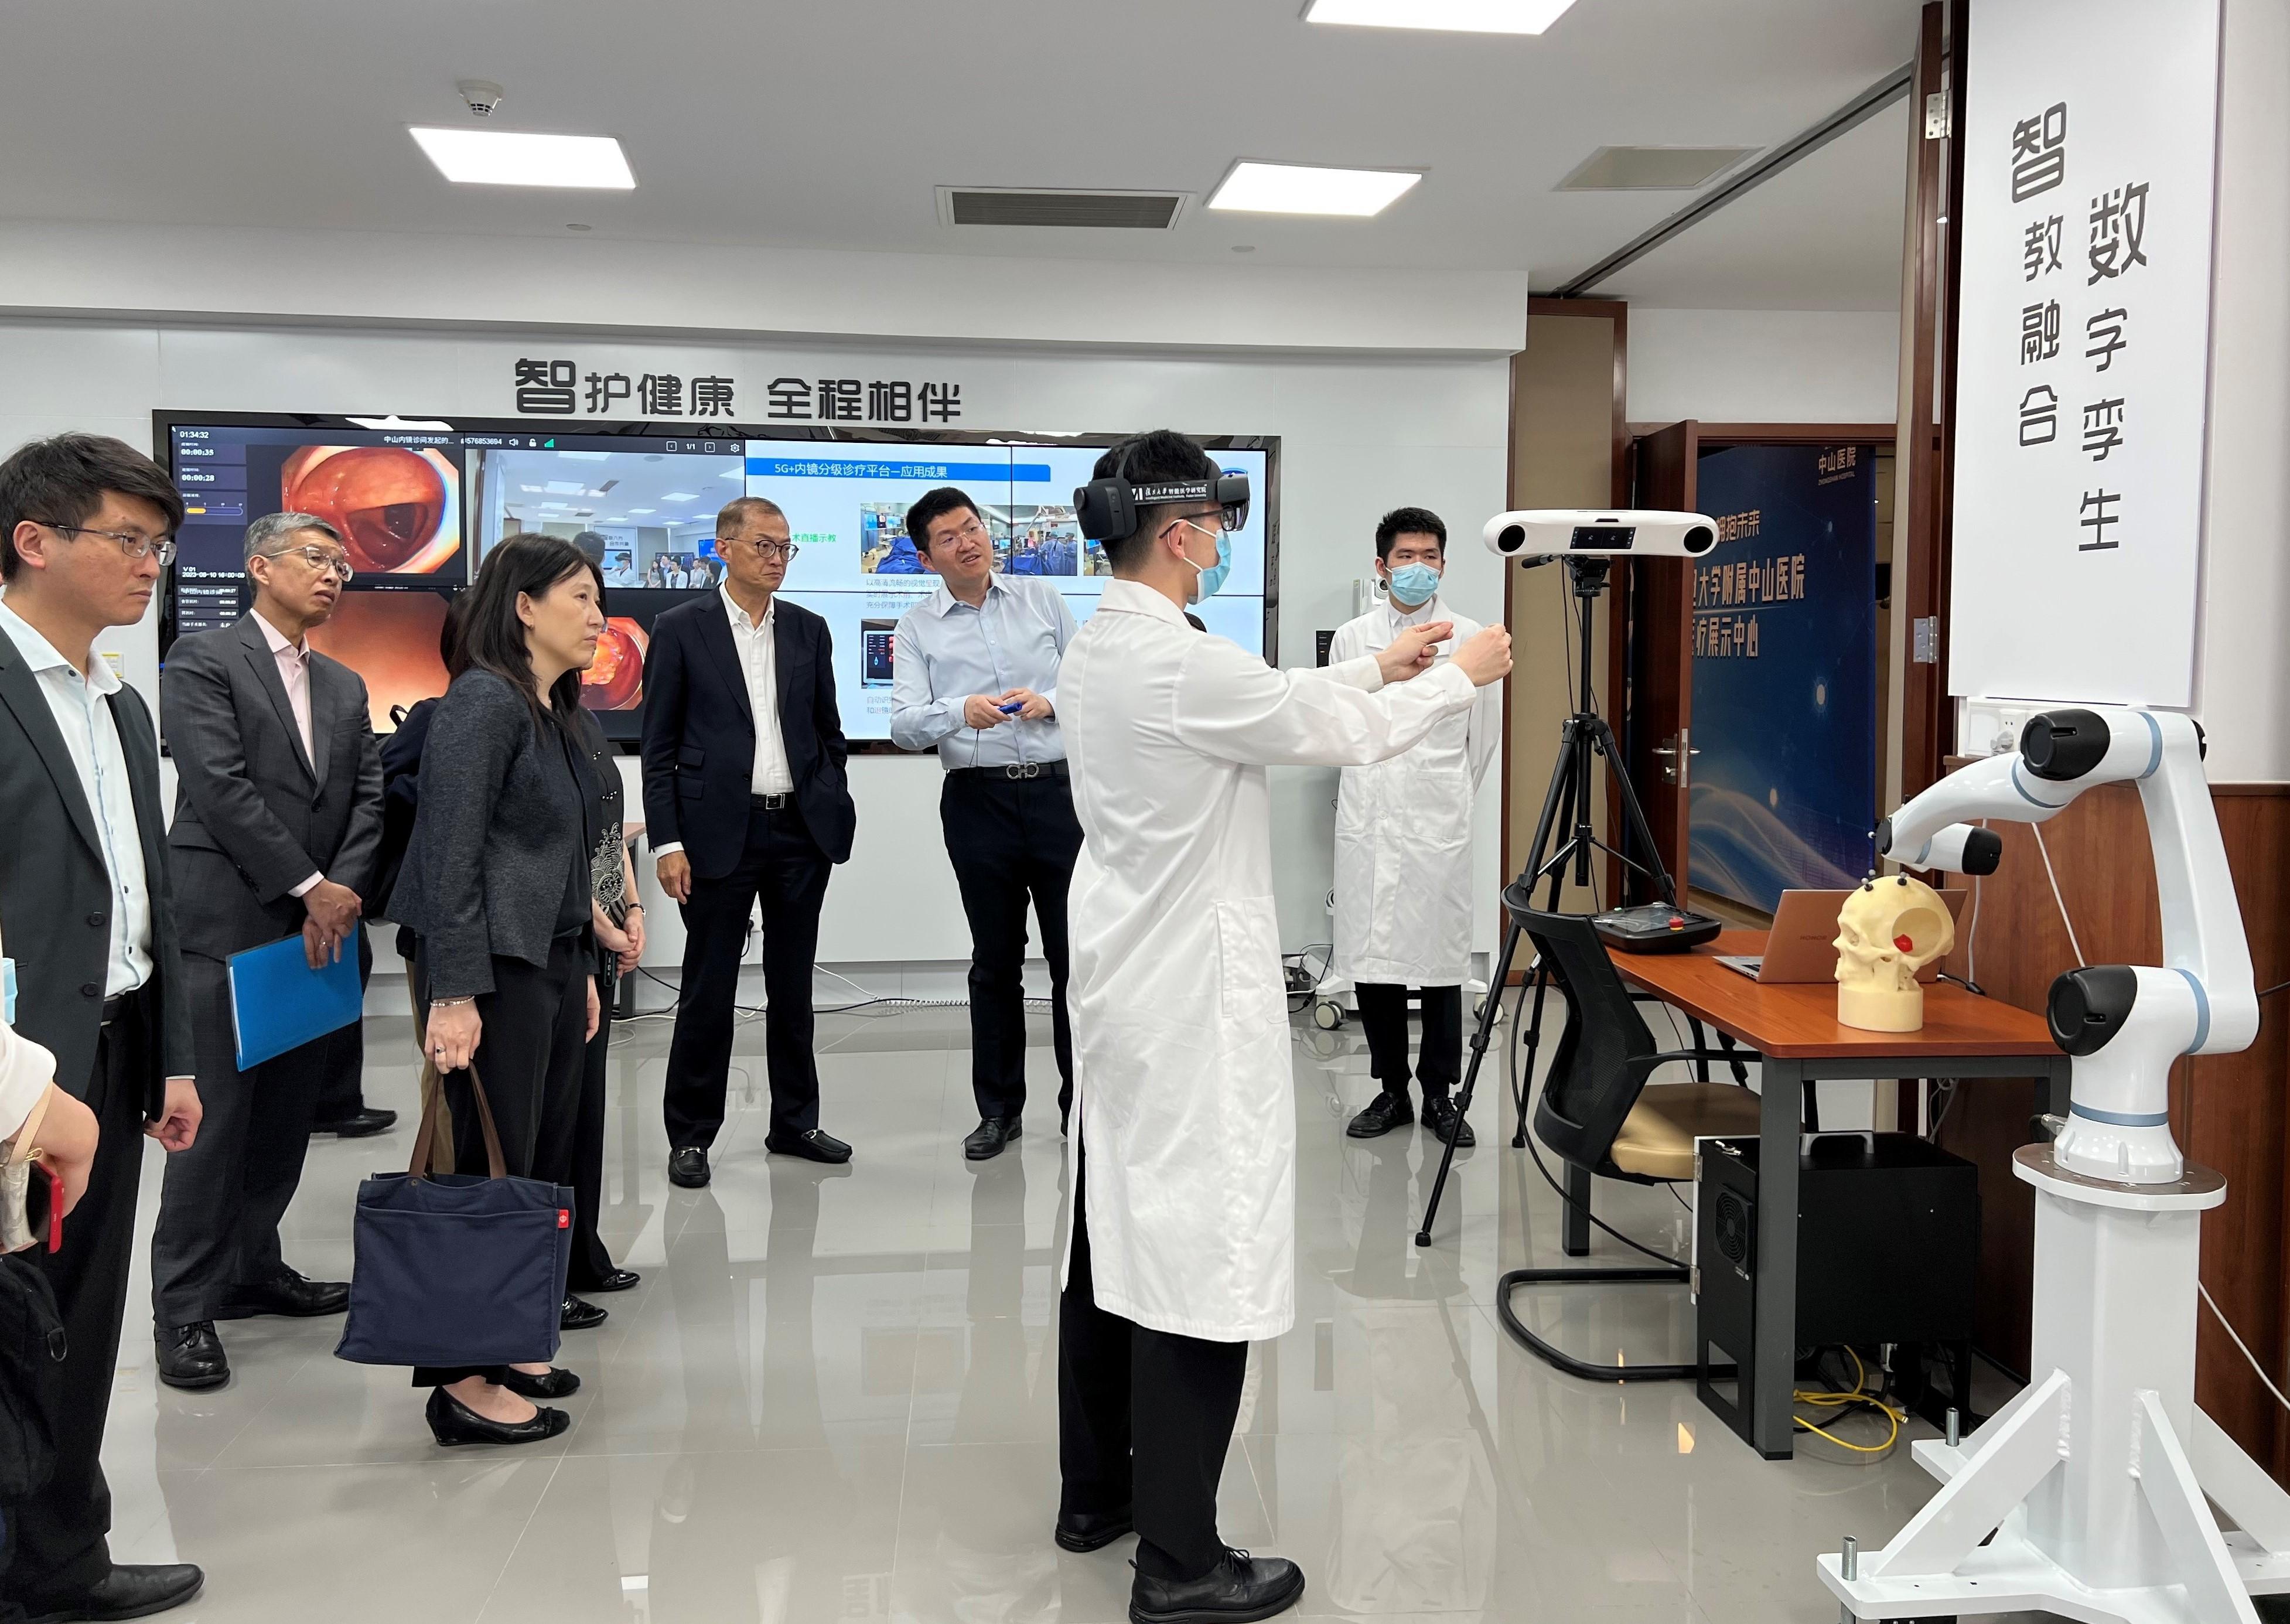 The Secretary for Health, Professor Lo Chung-mau (fourth left), toured the Exhibition Centre on Smart Healthcare of Zhongshan Hospital affiliated to Fudan University today (June 10) to learn about the hospital’s effort in enhancing treatment quality and user experience for patients through the operation as a smart hospital. Looking on is the Director of Cluster Services of the Hospital Authority, Dr Simon Tang (second left), and the Head of the Health Promotion Branch of the Department of Health, Dr Leung Yiu-hong (first left).